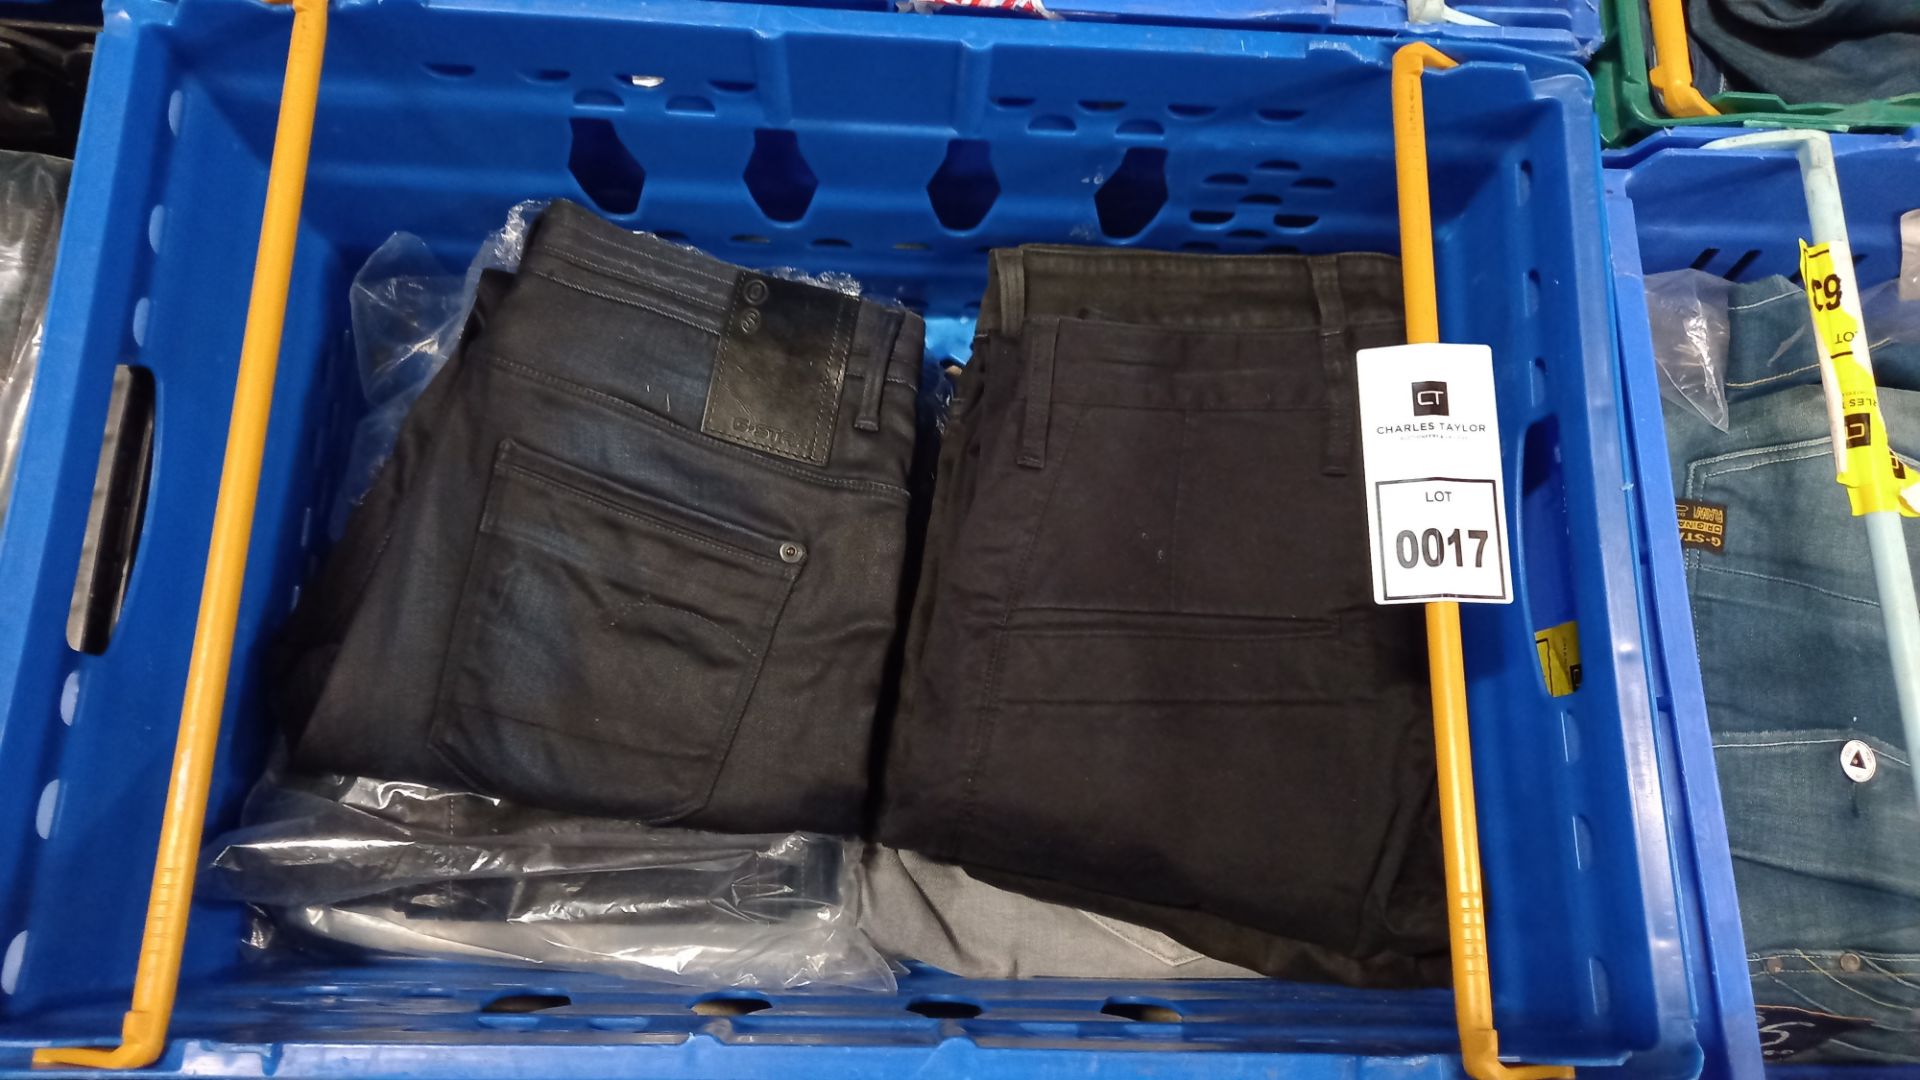 6 X BRAND NEW G STAR JEANS IN VARIOUS STYLES AND SIZES IE LIGHT BLUE, DARK BLUE, GREY AND BLACK ETC - Image 2 of 2